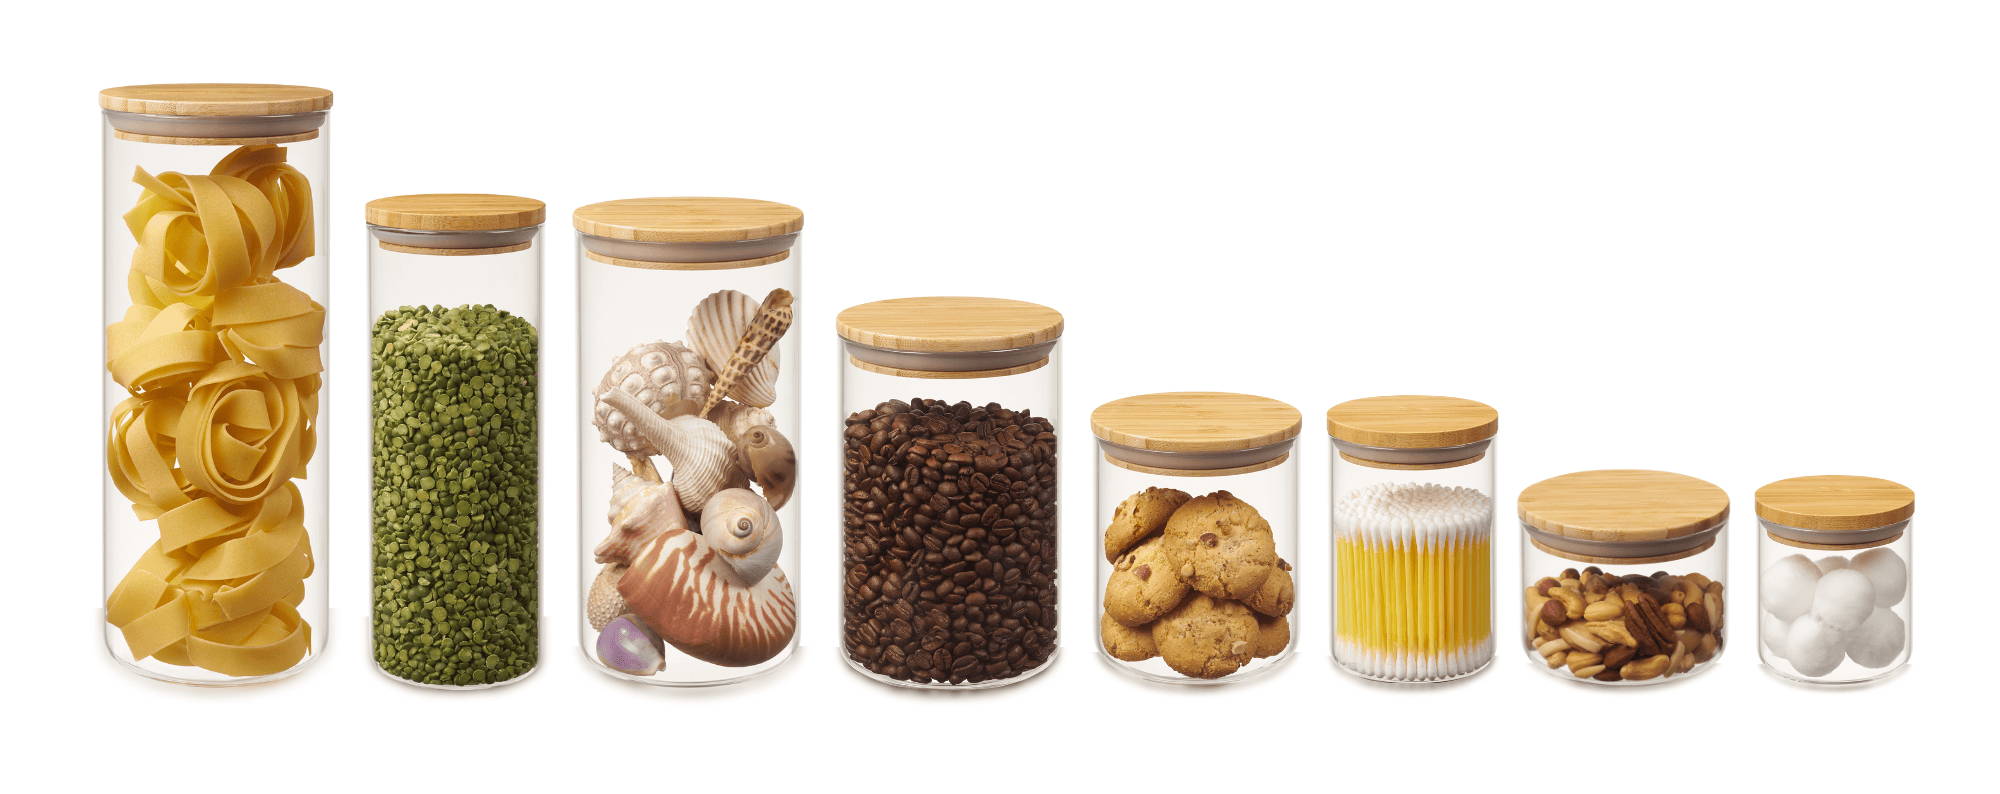 8 different sizes of canisters, used to store all sorts of house hold items from cotton balls to coffee beans and grains.